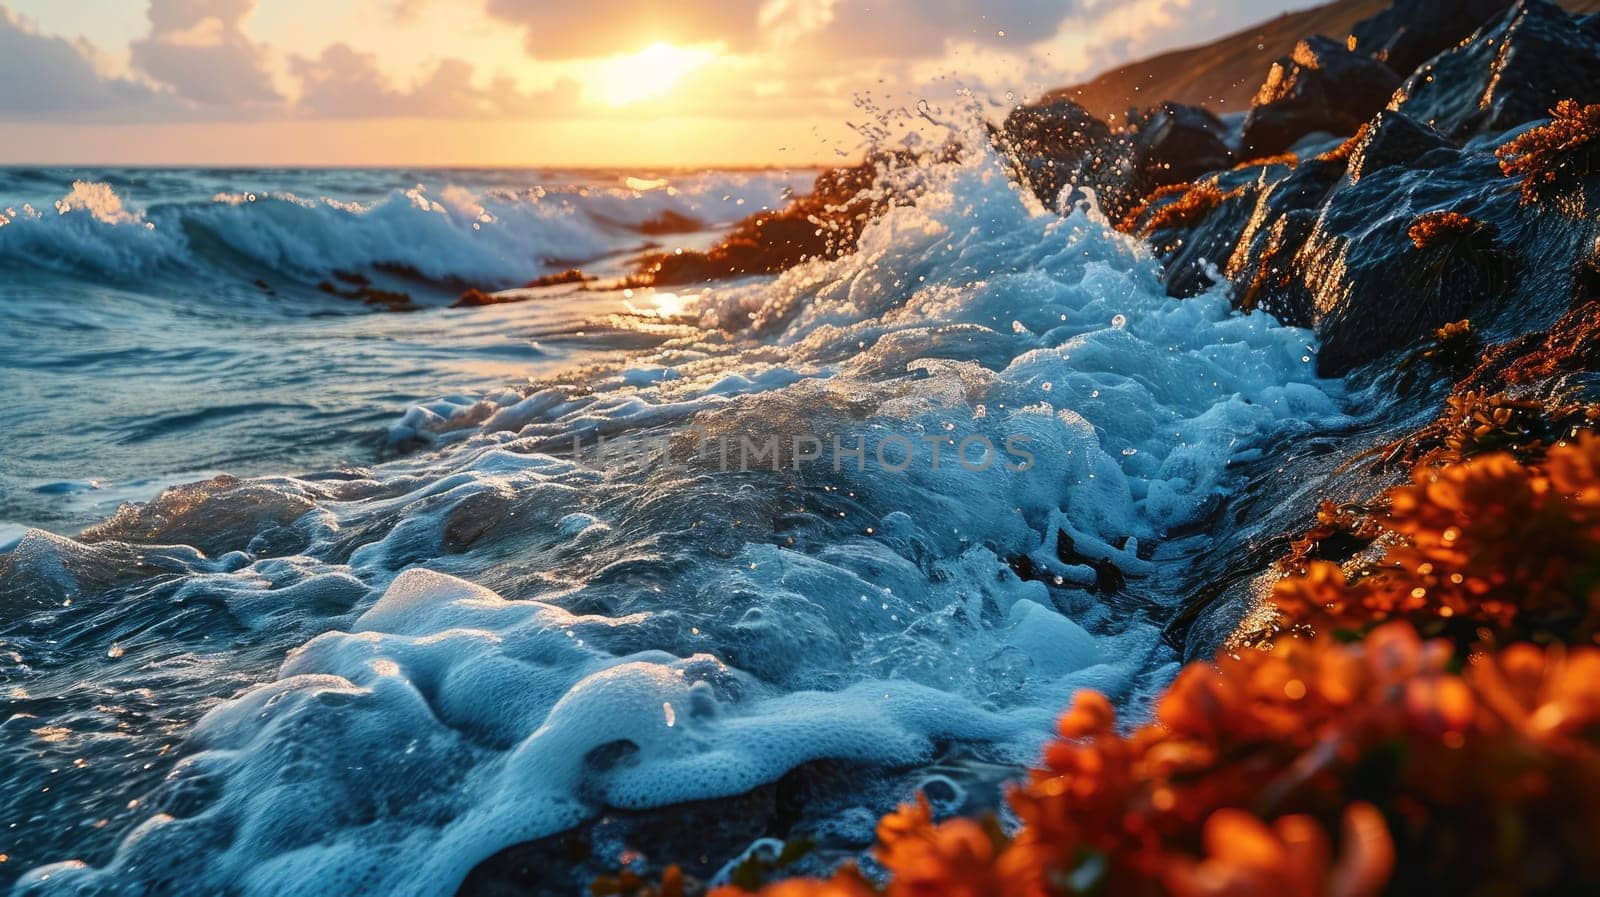 Foamy waves against the background of the sunset create a magical sight by the seashore